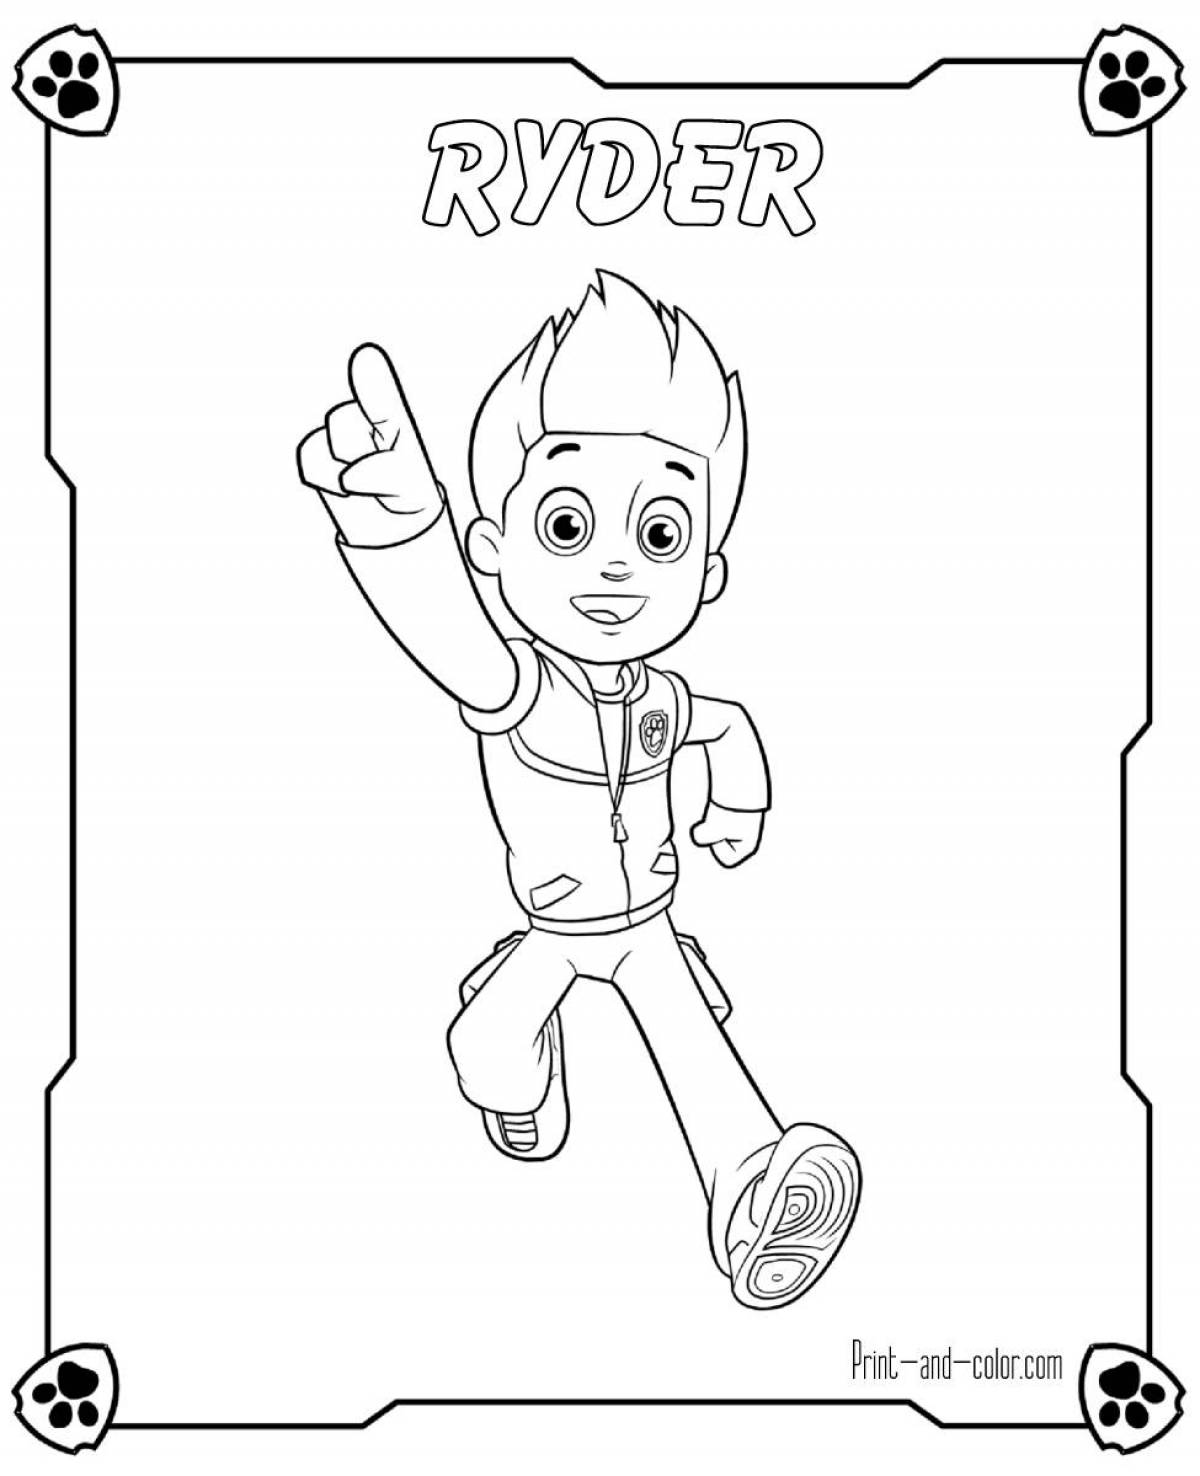 Color-gorgious coloring page paw patrol rider